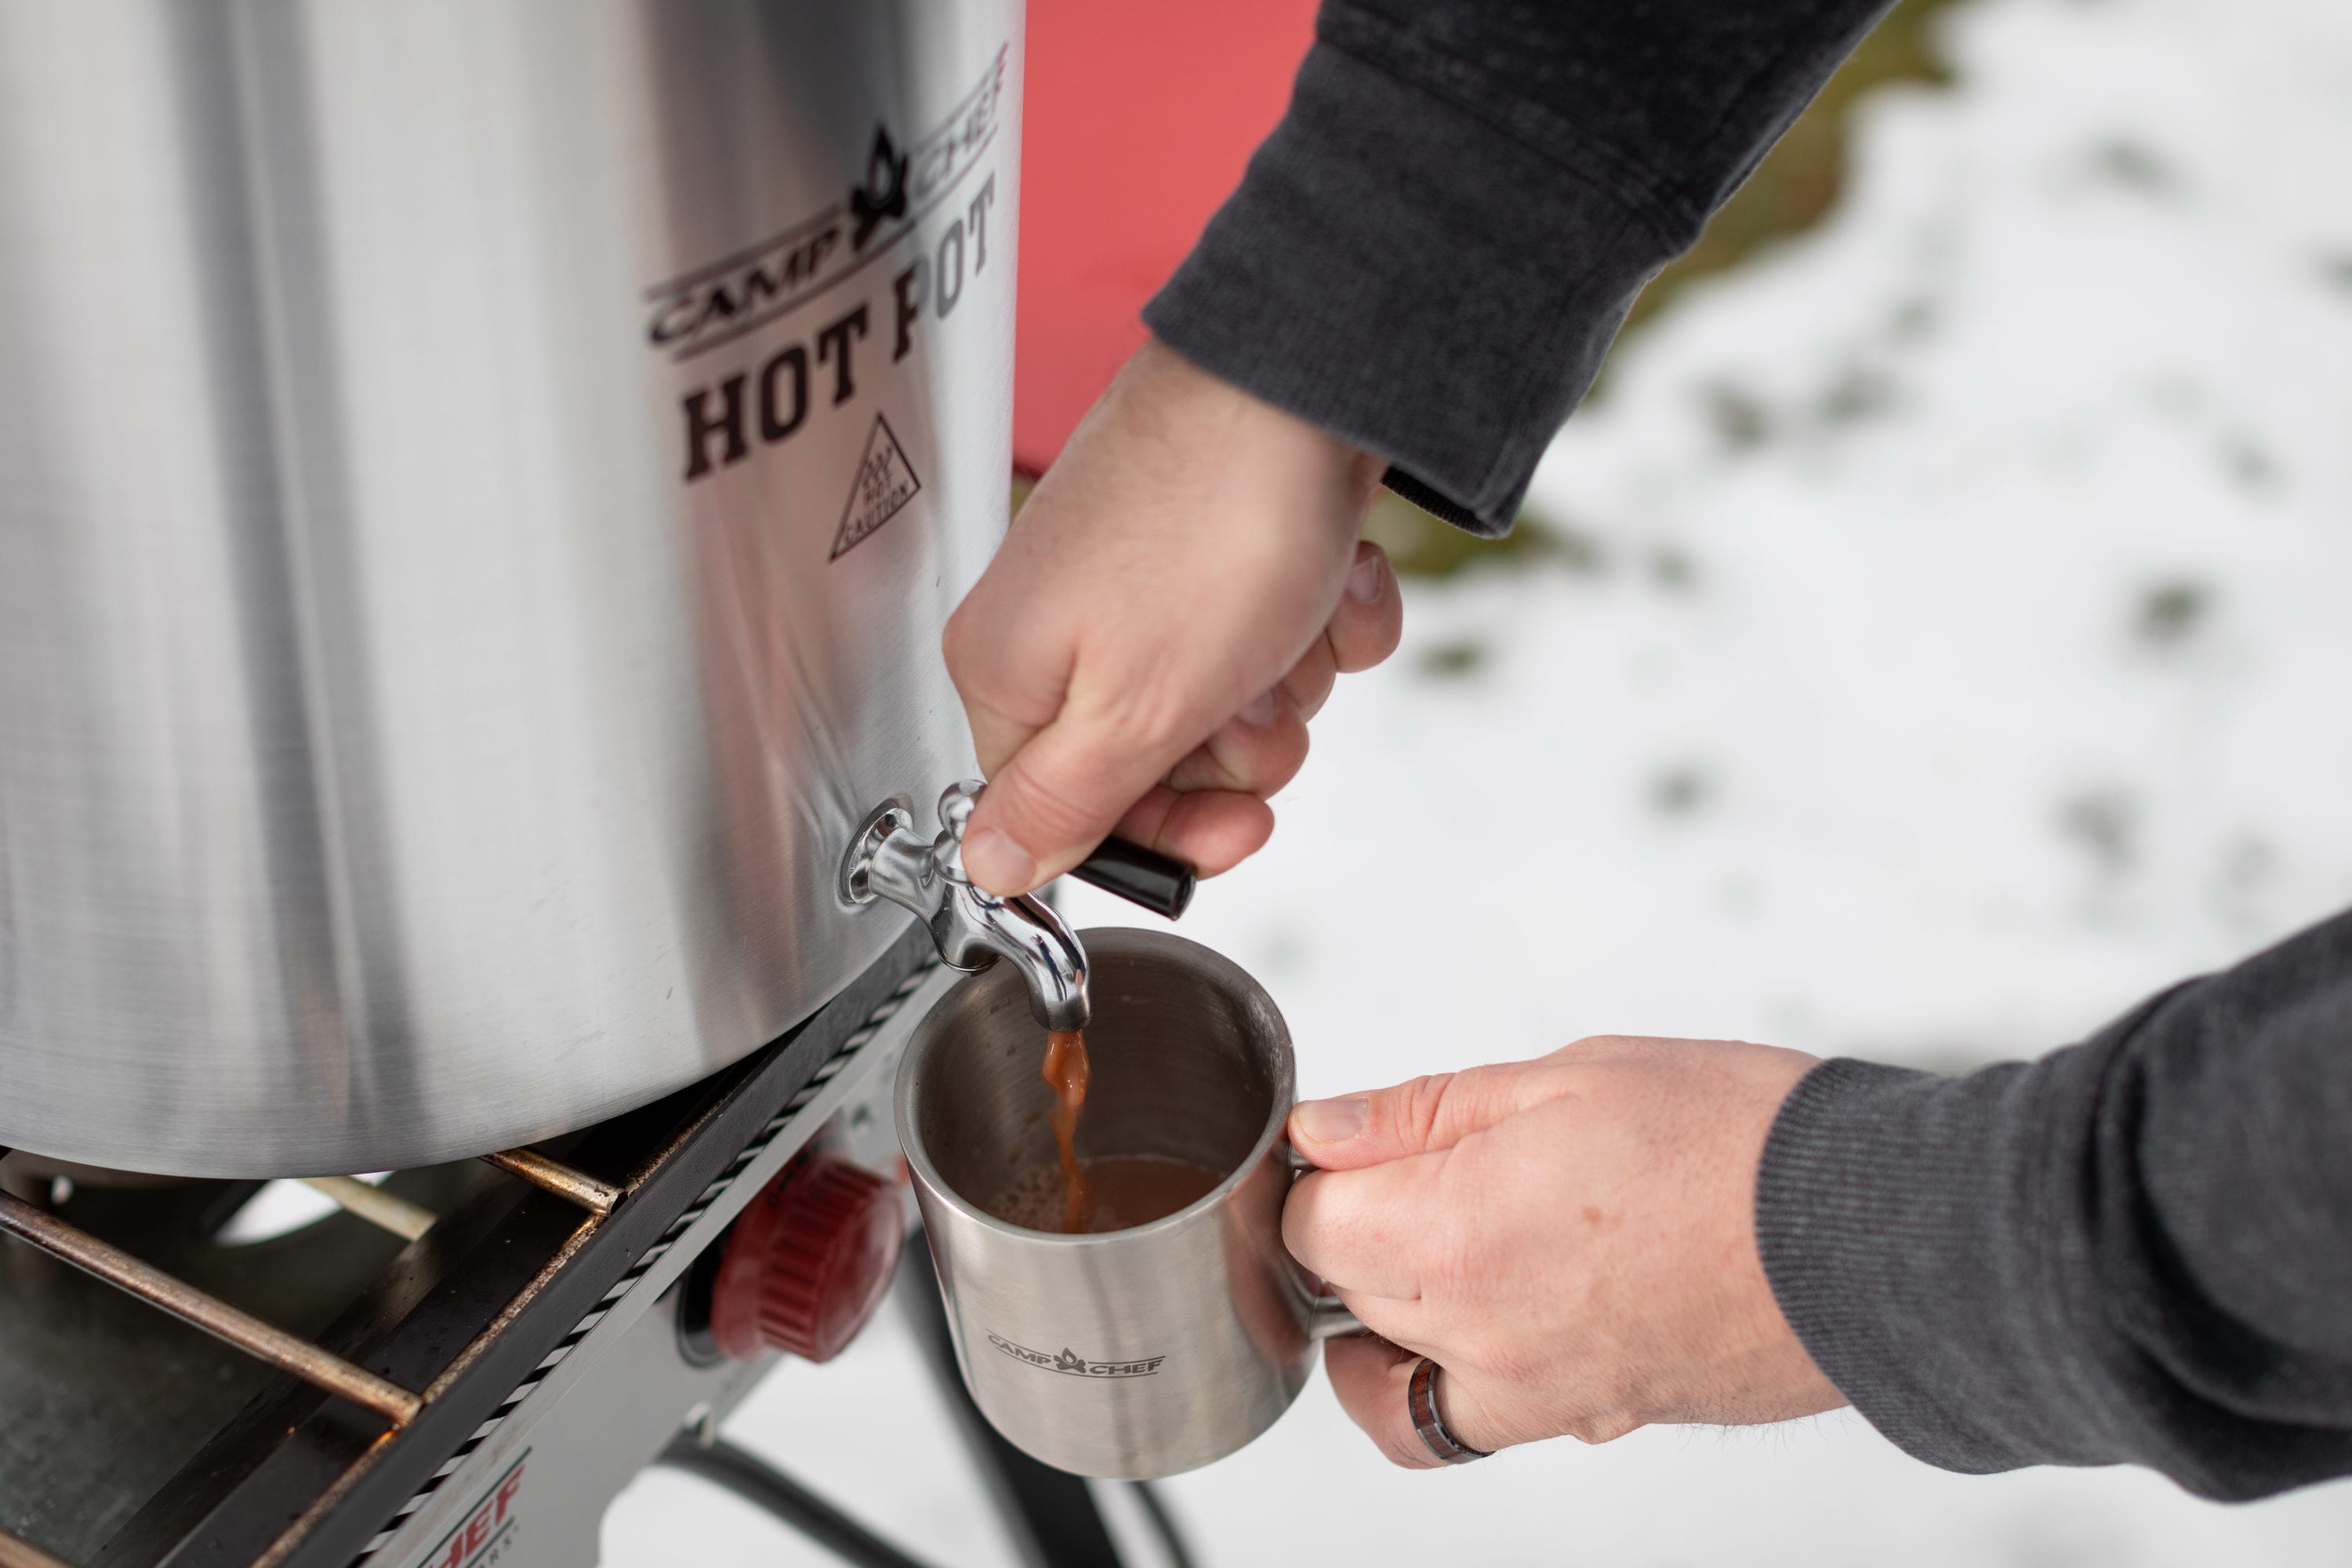 Camp Chef Aluminum Hot Water Pot with Spigot - For Hot Chocolate & Hot  Apple Cider - Hot Water Storage with a Spigot for Dishes - Easy-to-Serve  Hot